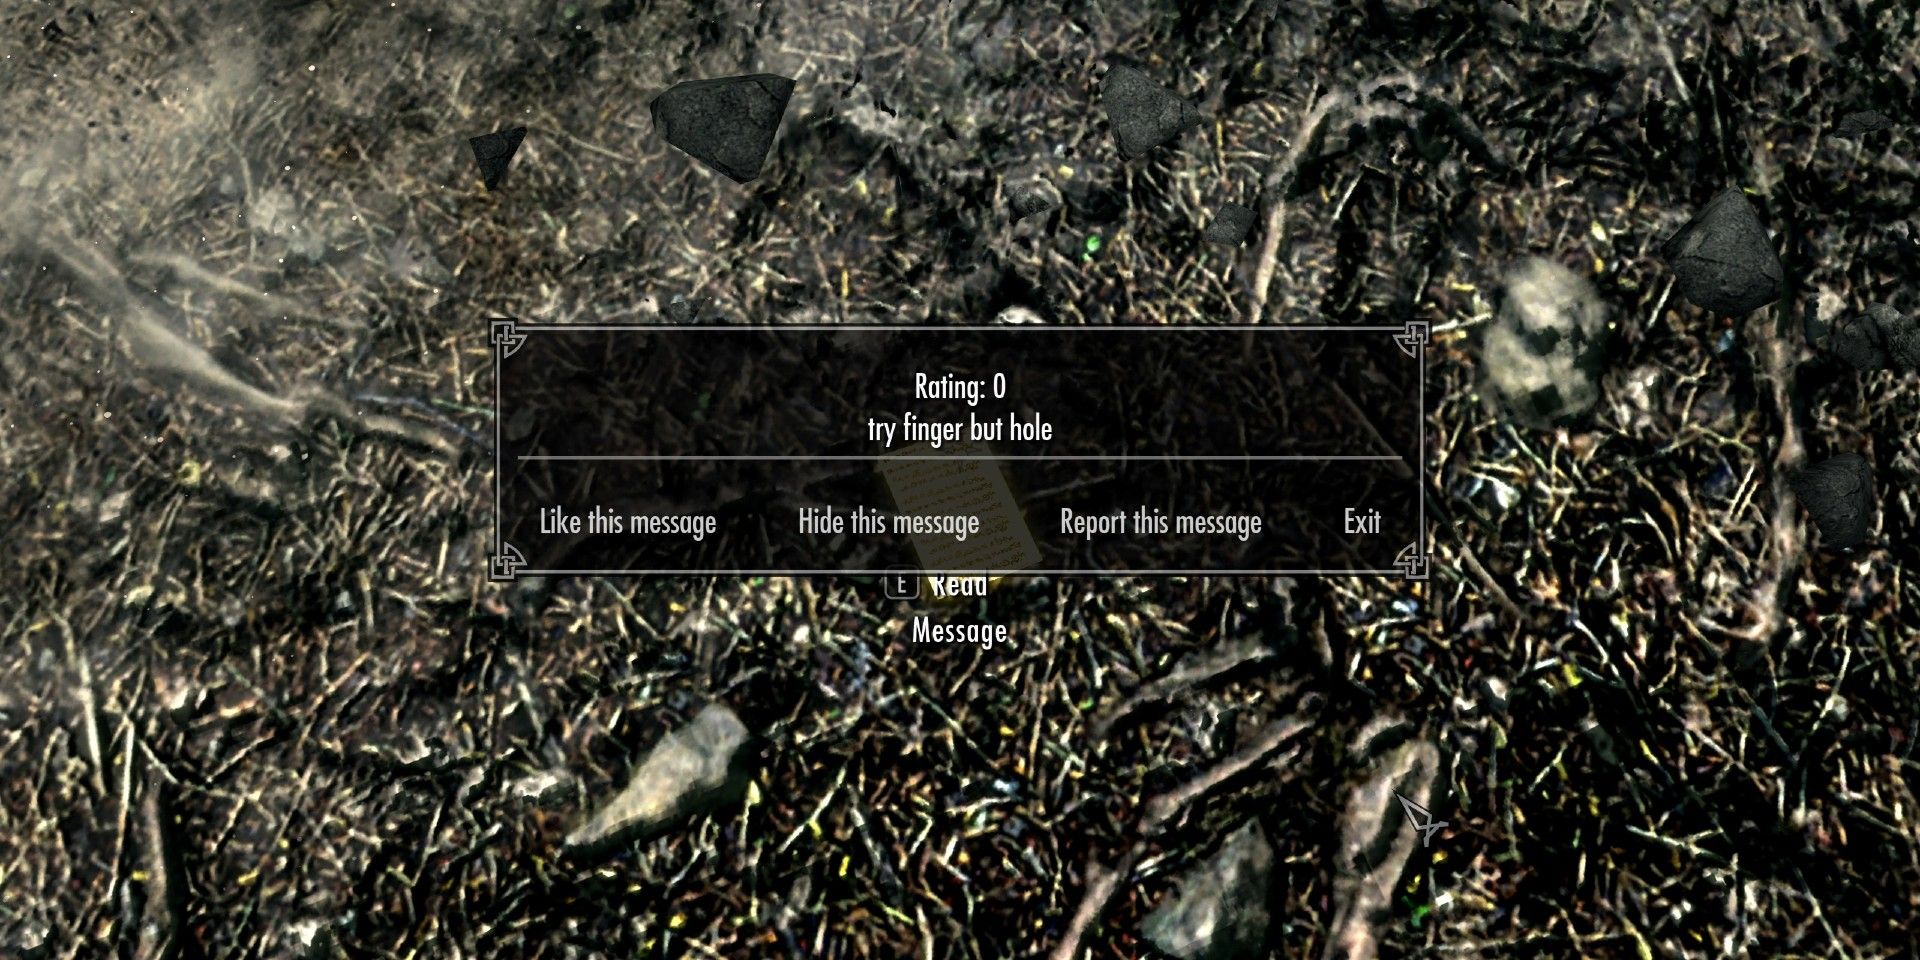 Elden Ring-Style Messages Come To Skyrim Through Mod